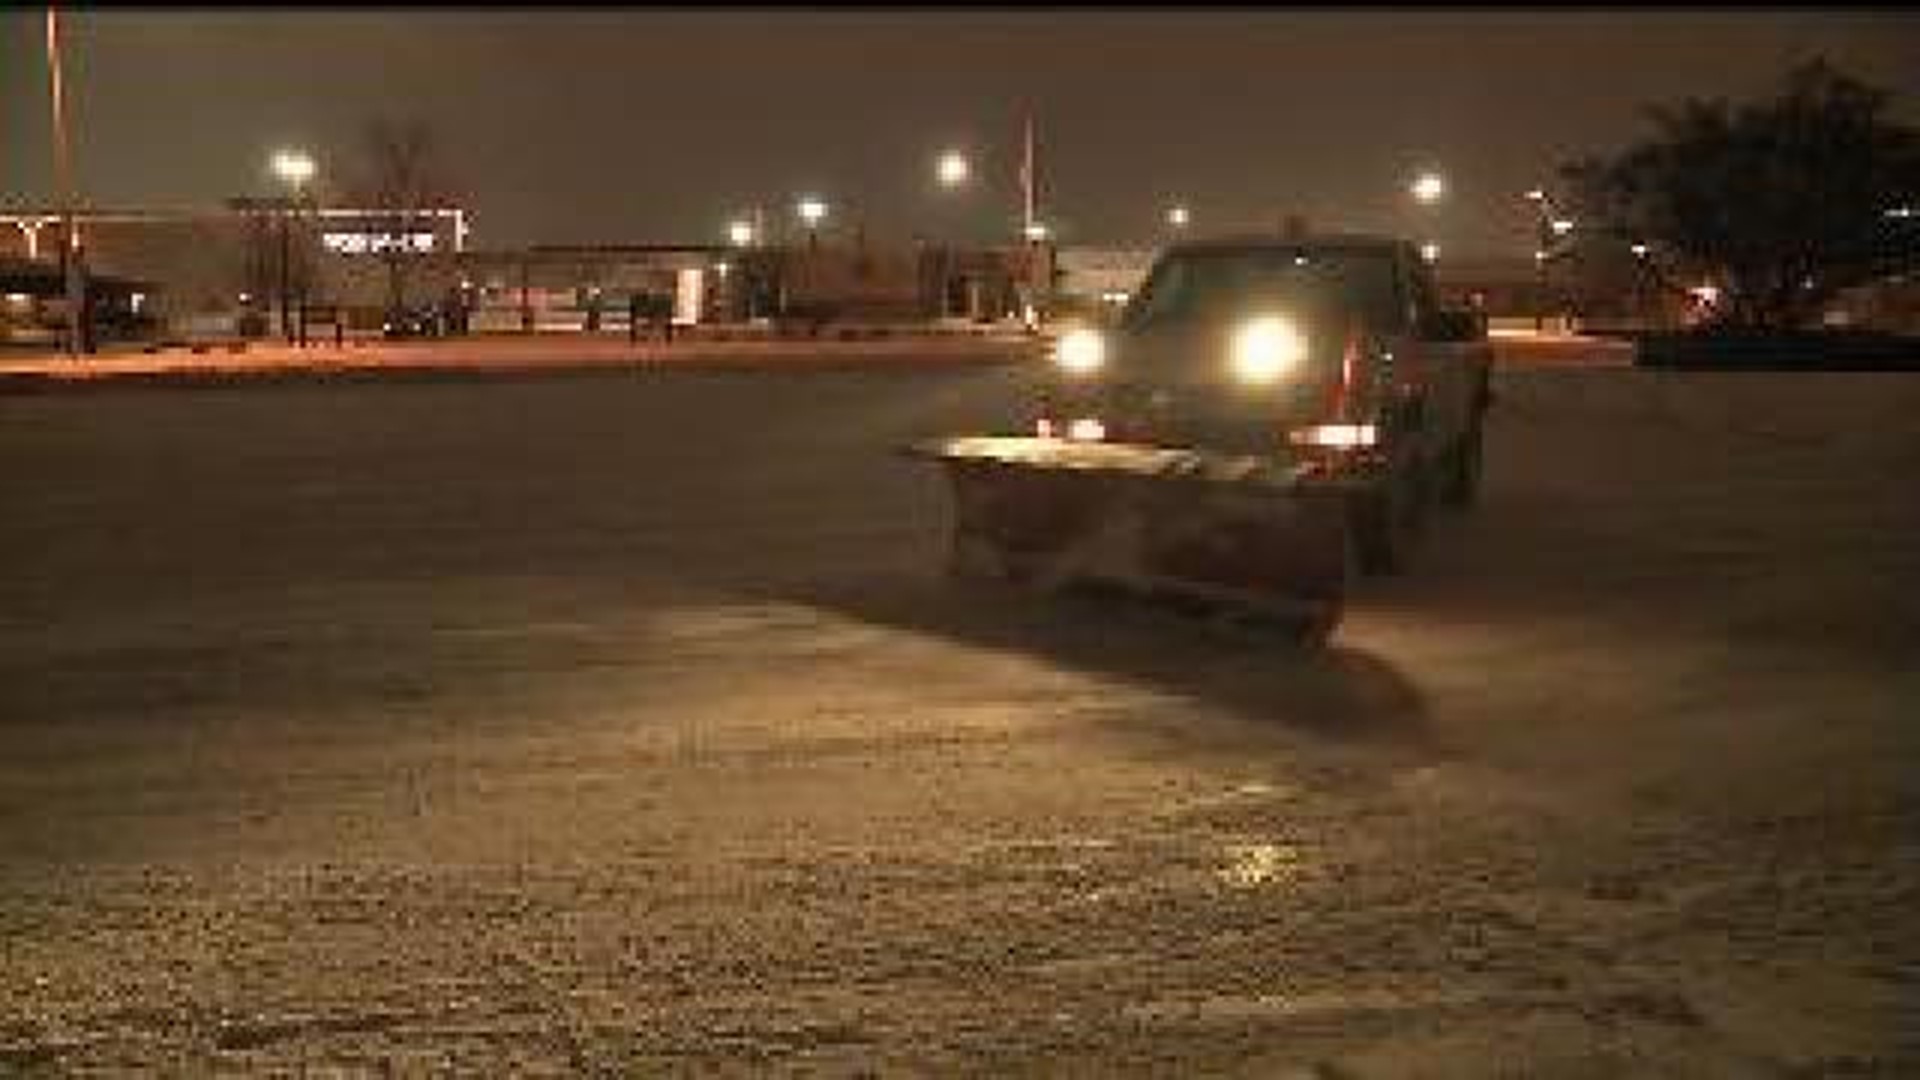 Snowplows out to make morning commute safer